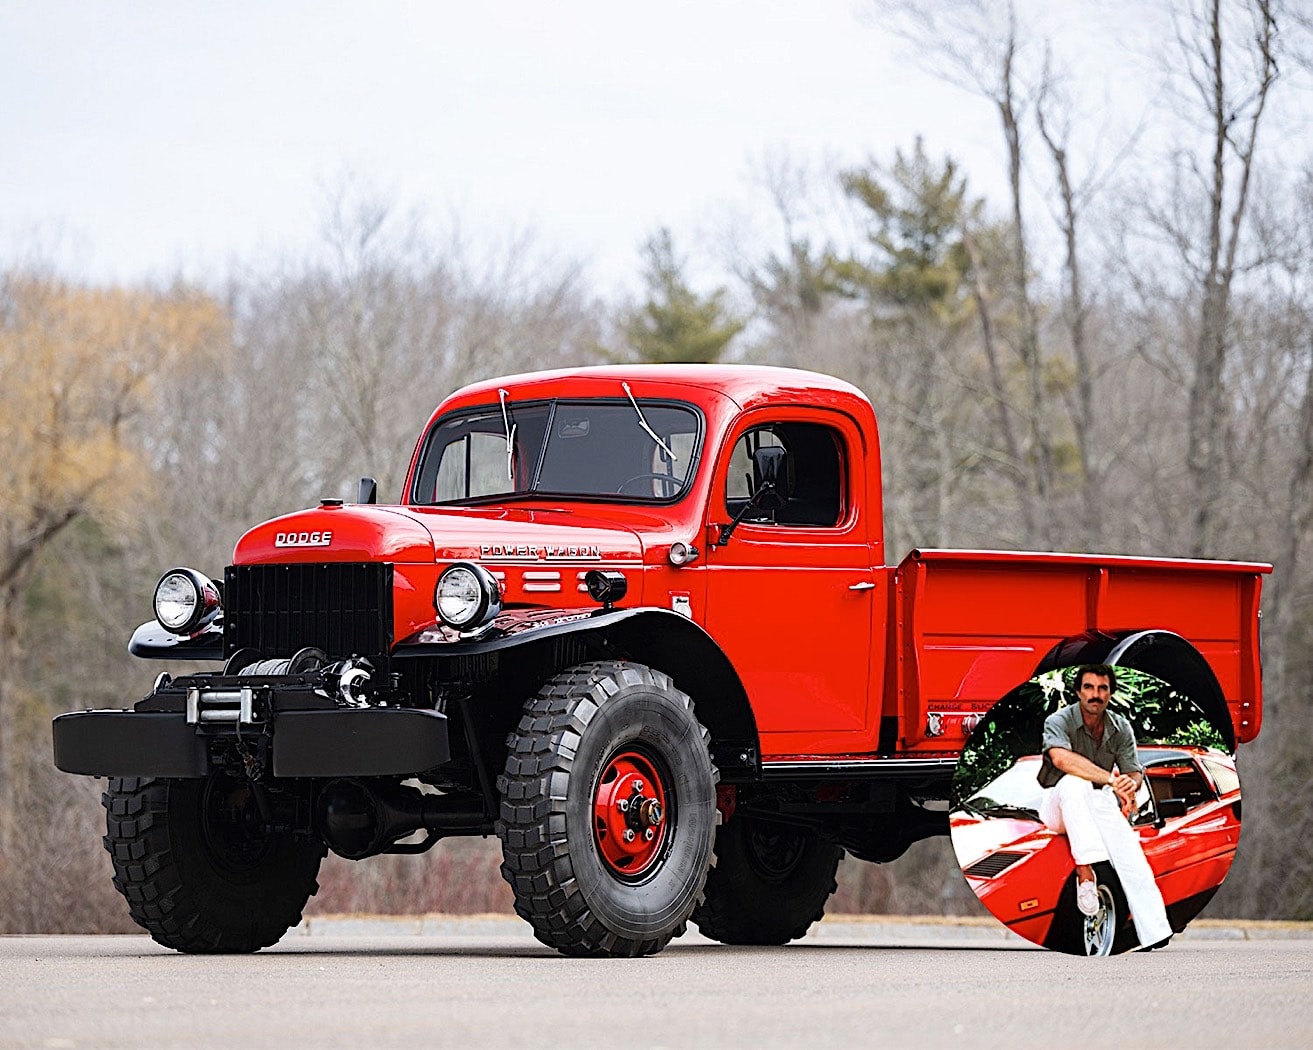 Tom Sellecks 1953 Dodge Power Wagon Selling With Rifle Rack In The Cab